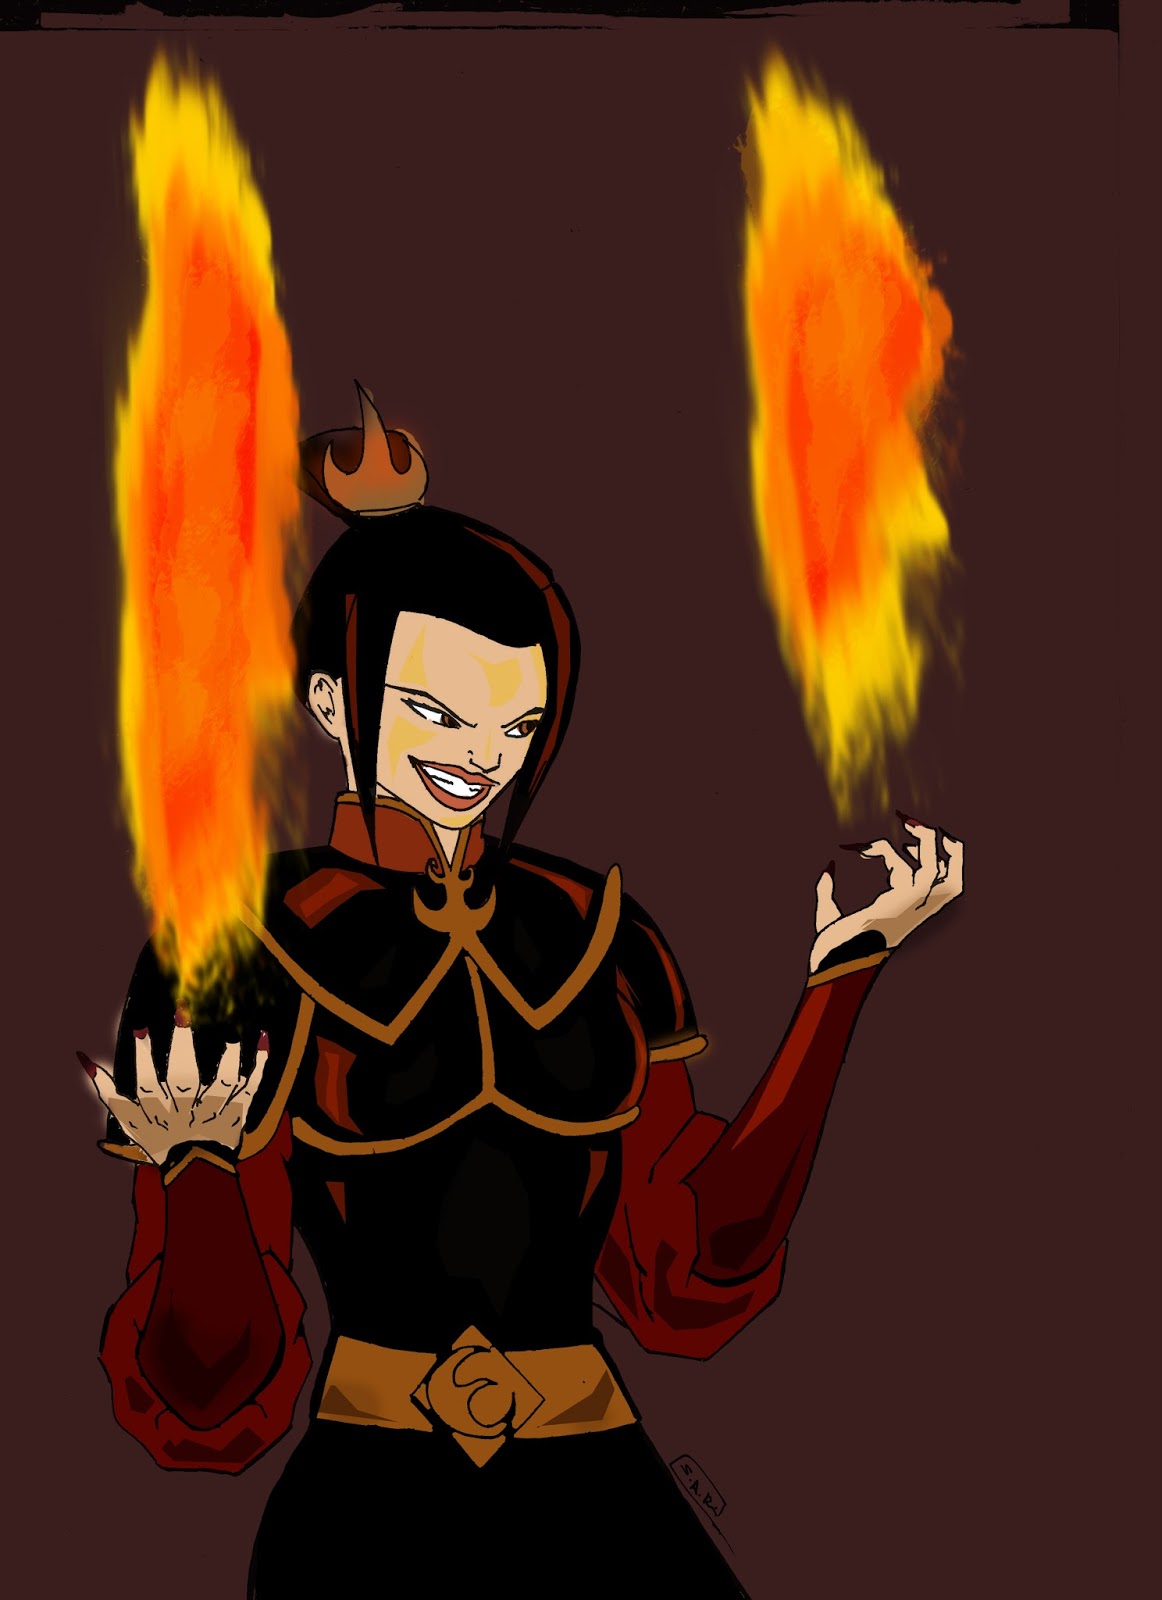 this week i was given azula as part of the weekly drawing challenge